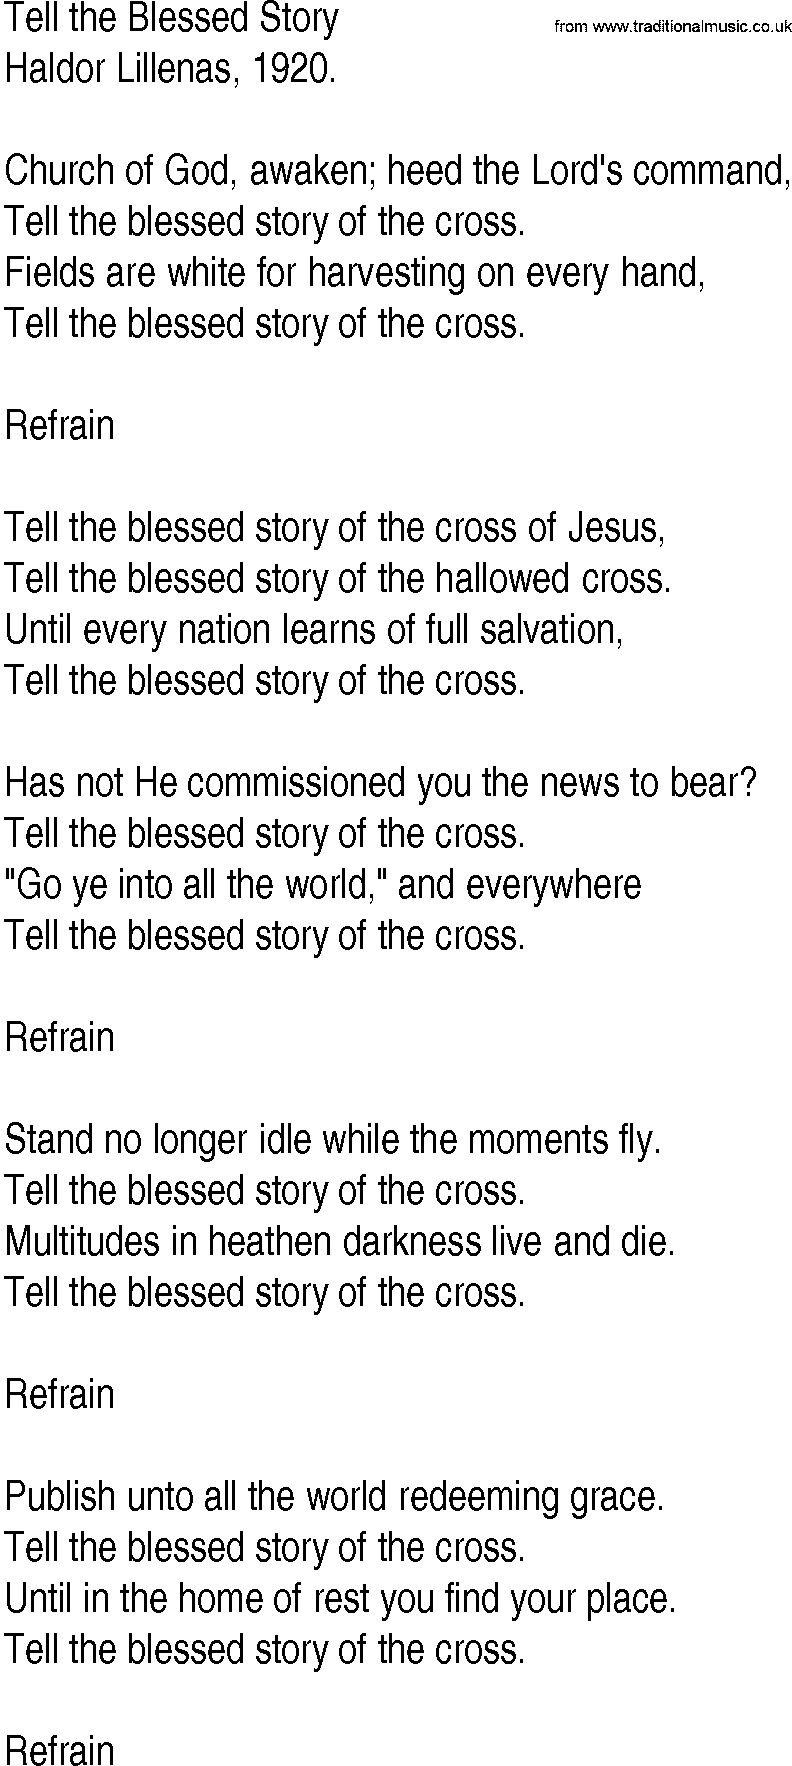 Hymn and Gospel Song: Tell the Blessed Story by Haldor Lillenas lyrics